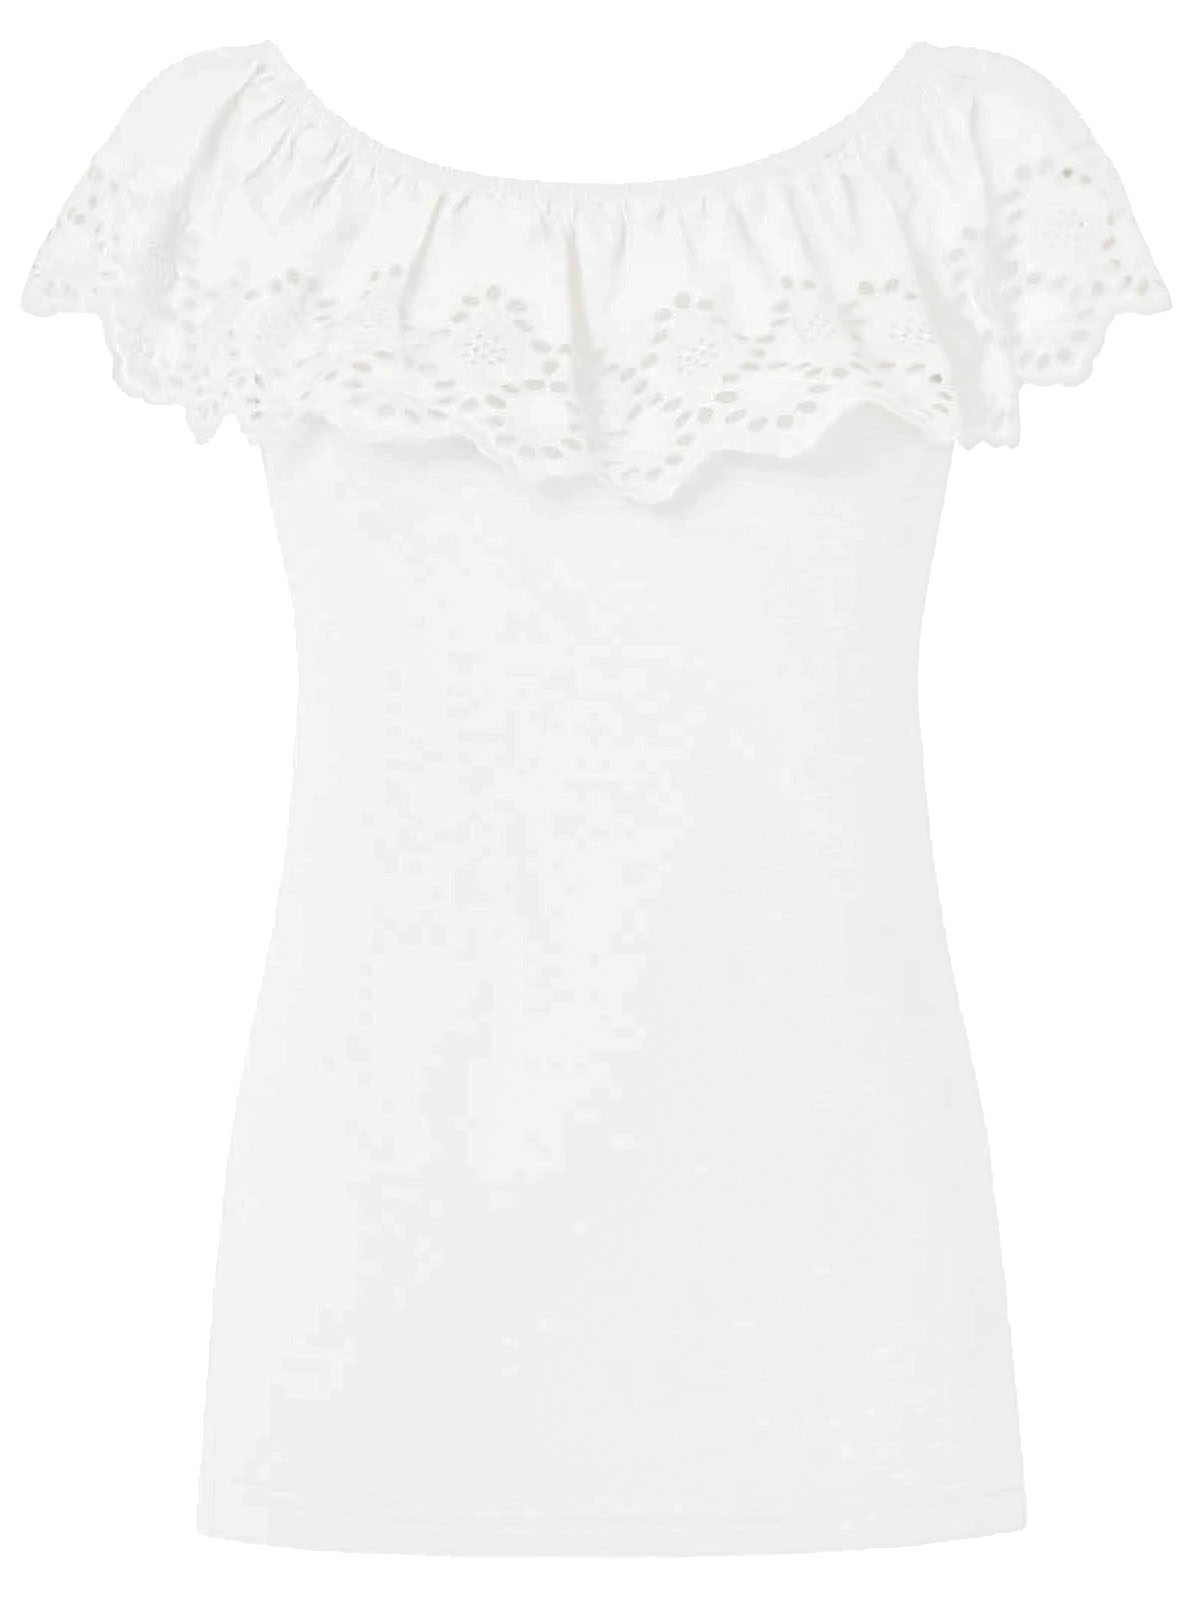 Joe Browns - - WHITE Broderie Frill Top - Size 8 to 18